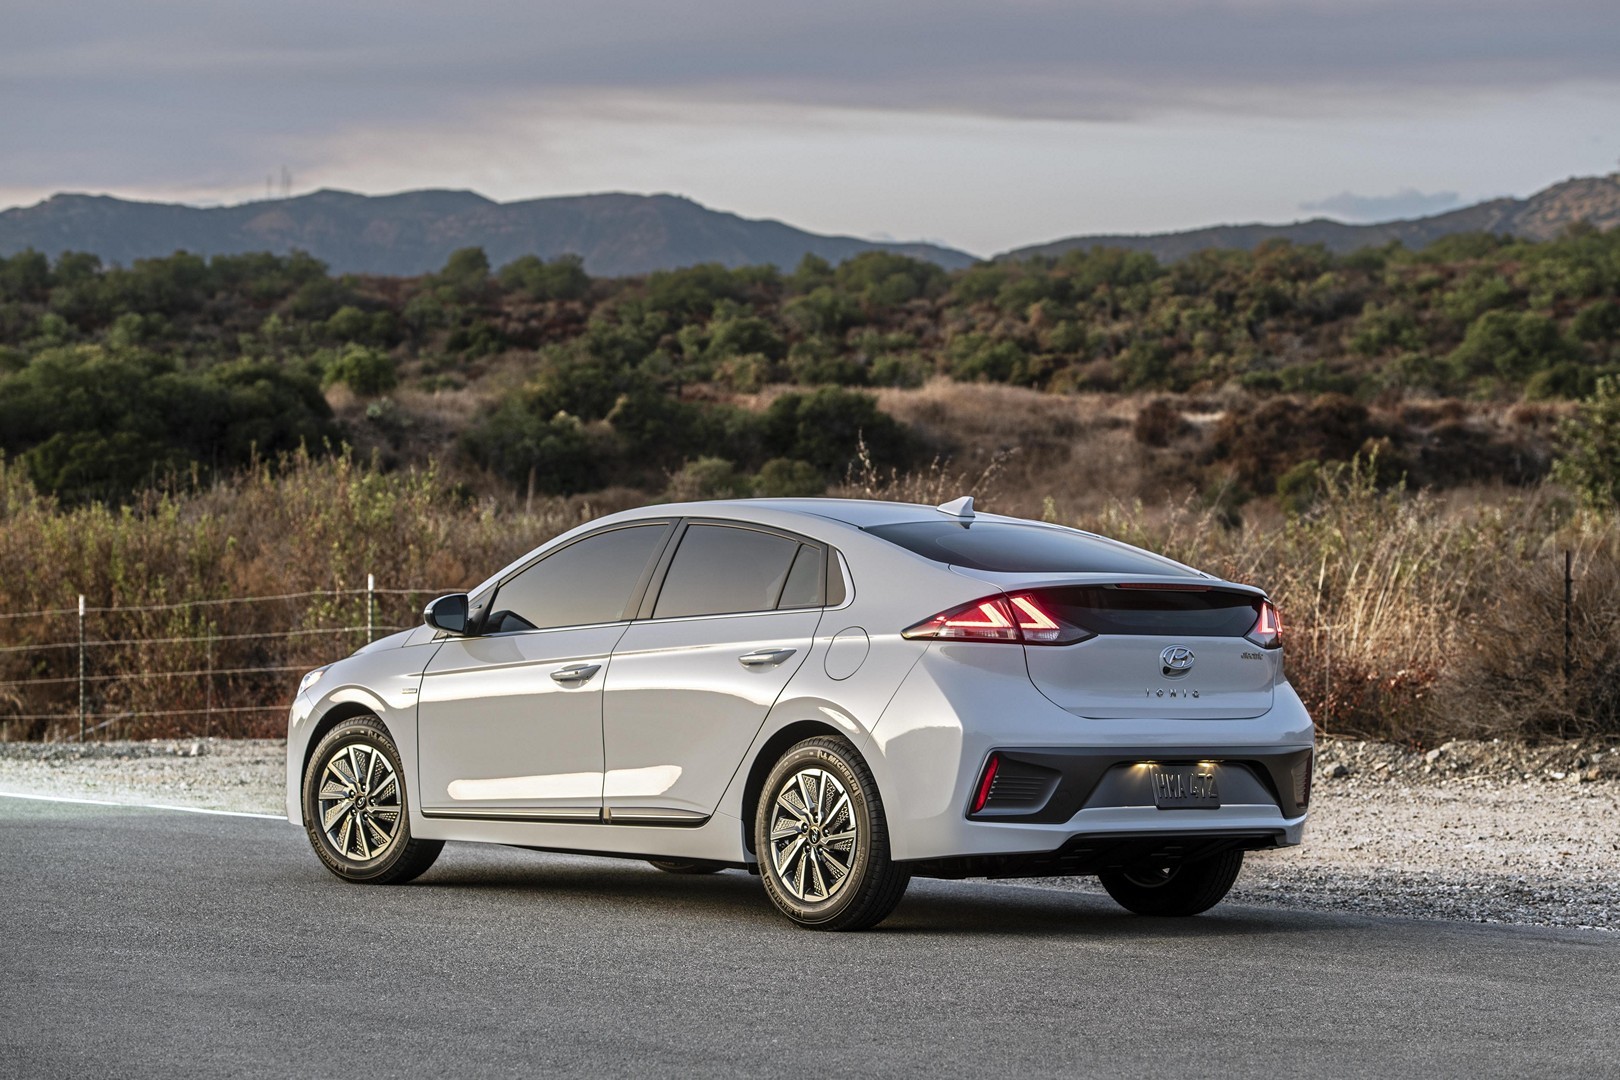 2020-hyundai-ioniq-electric-gets-more-range-and-power-costs-34-000